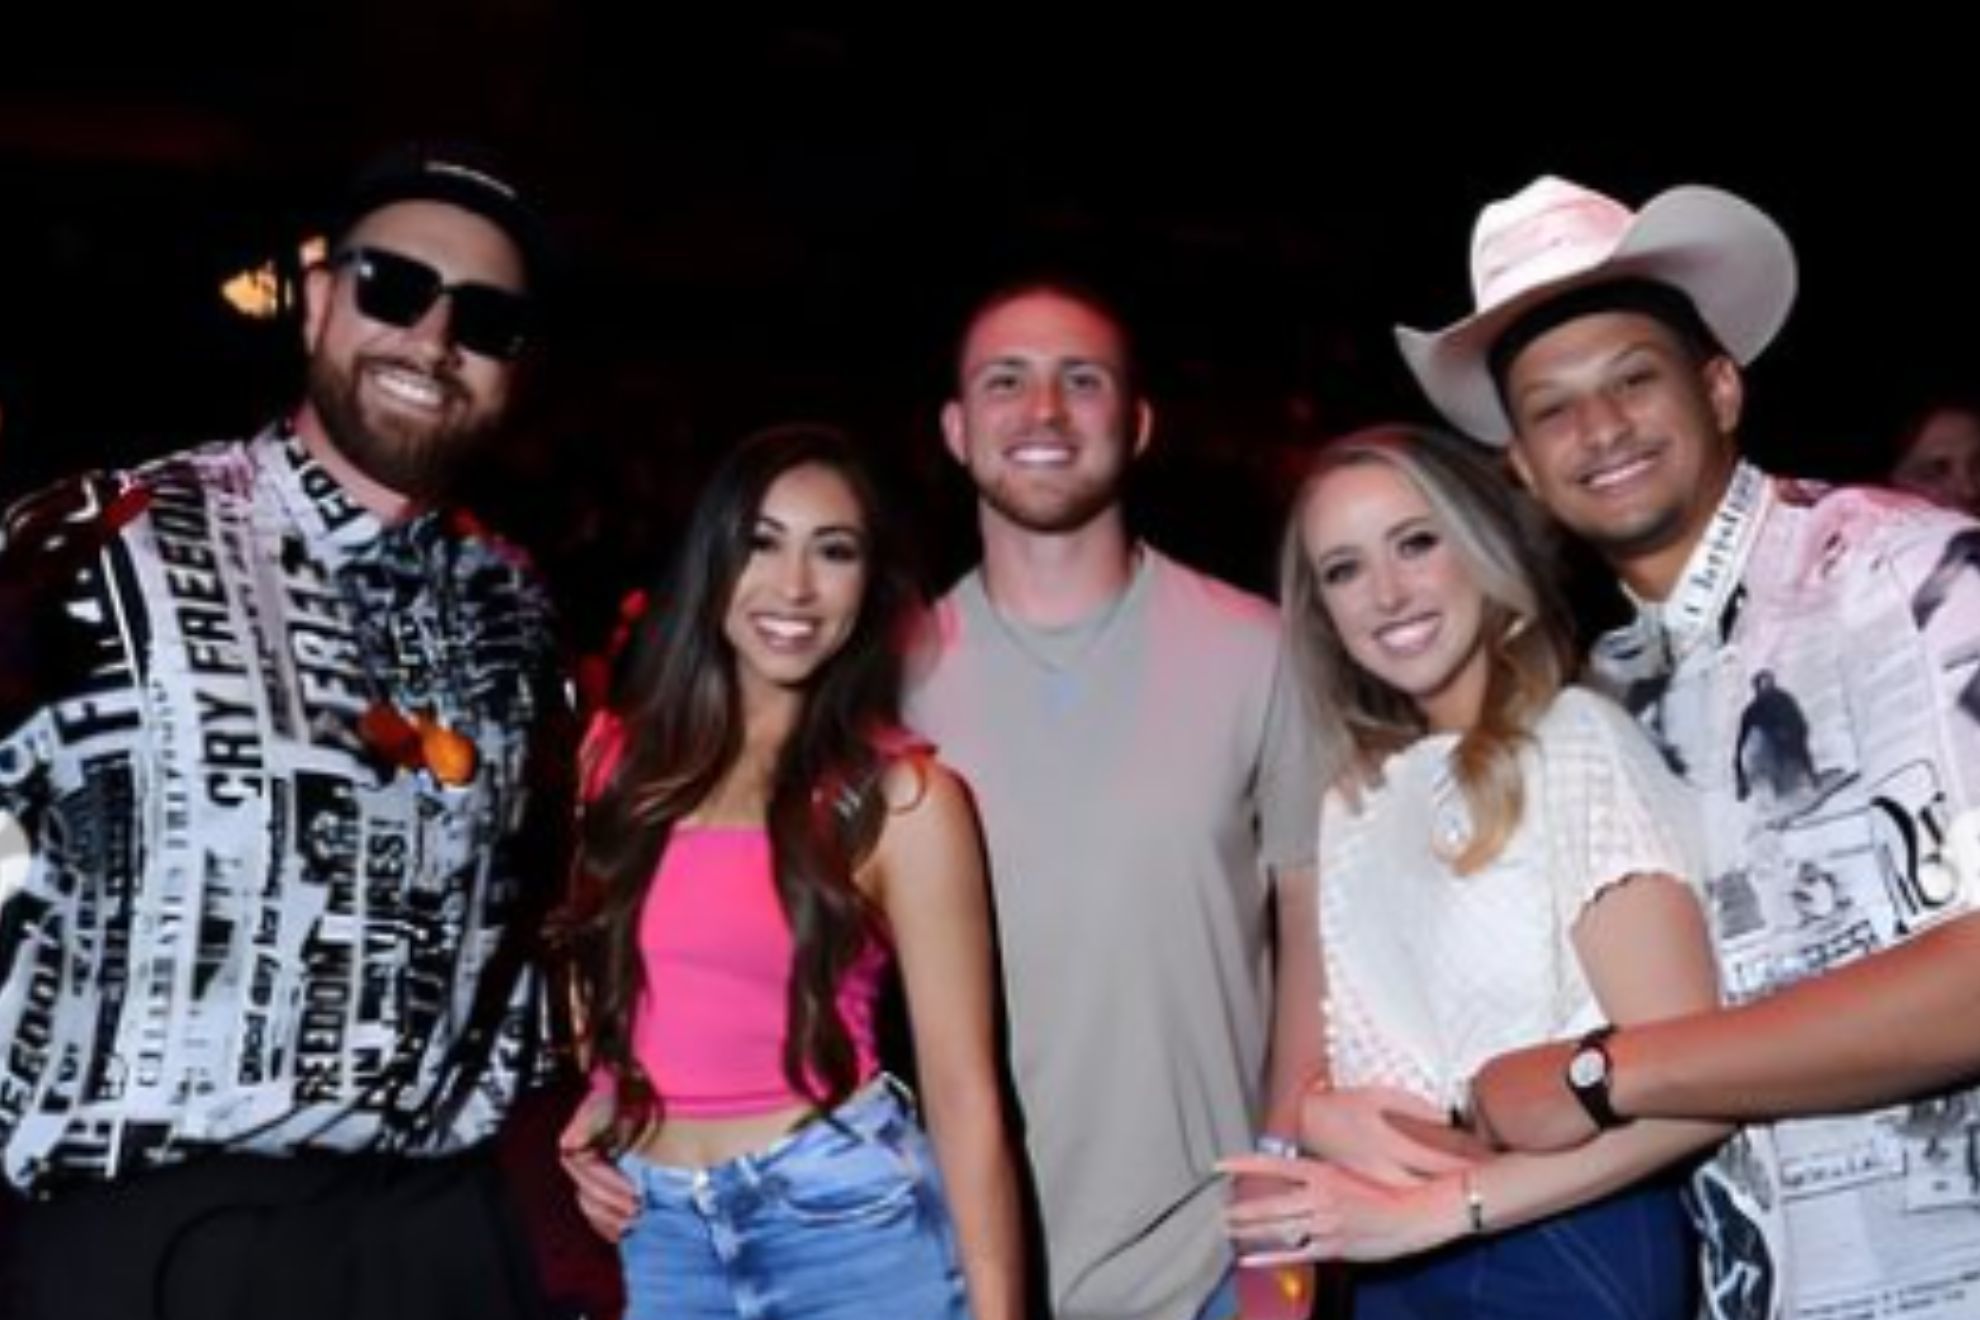 Old Patrick Mahomes parties with wife Brittany, who teases him and Travis Kelce